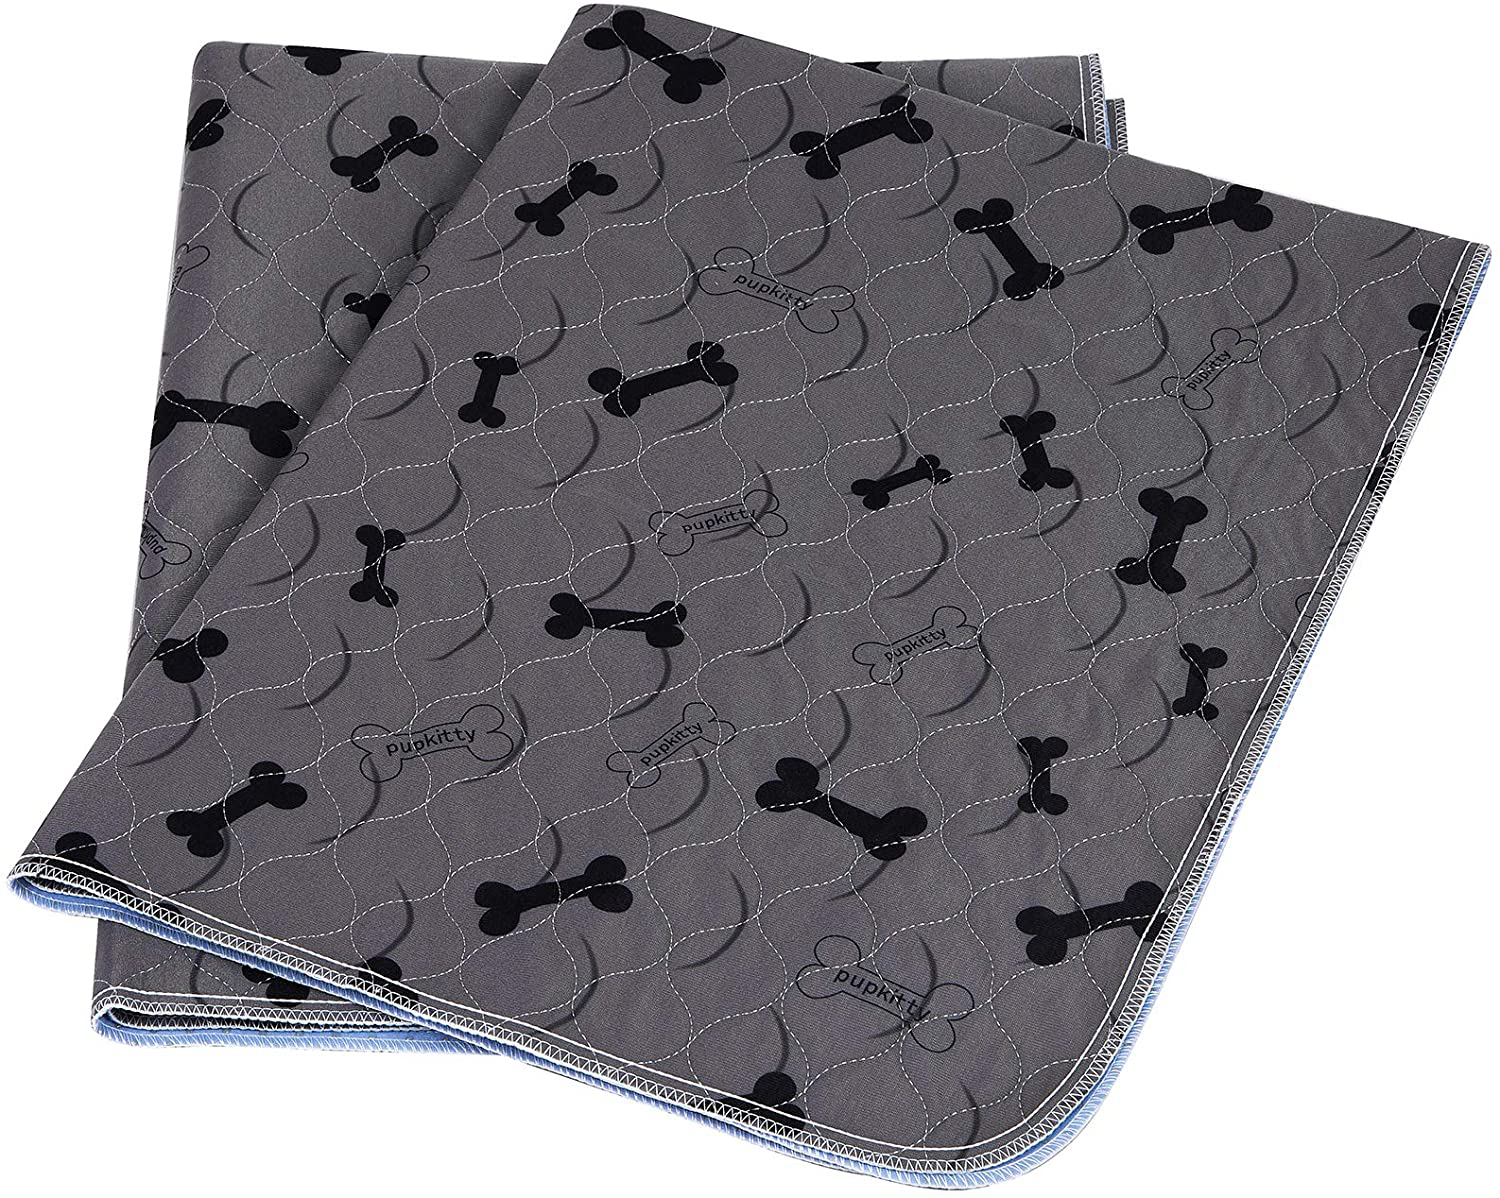 Washable Dog Pee Pads +Free Grooming Gloves,Non Slip Dog Mats with Great Urine Absorption,Reusable Puppy Pee Pads for Whelping,Potty,Training,Playpen Crate Animals & Pet Supplies > Pet Supplies > Dog Supplies > Dog Kennels & Runs JdPet 72x72 Inch (Pack of 1)  